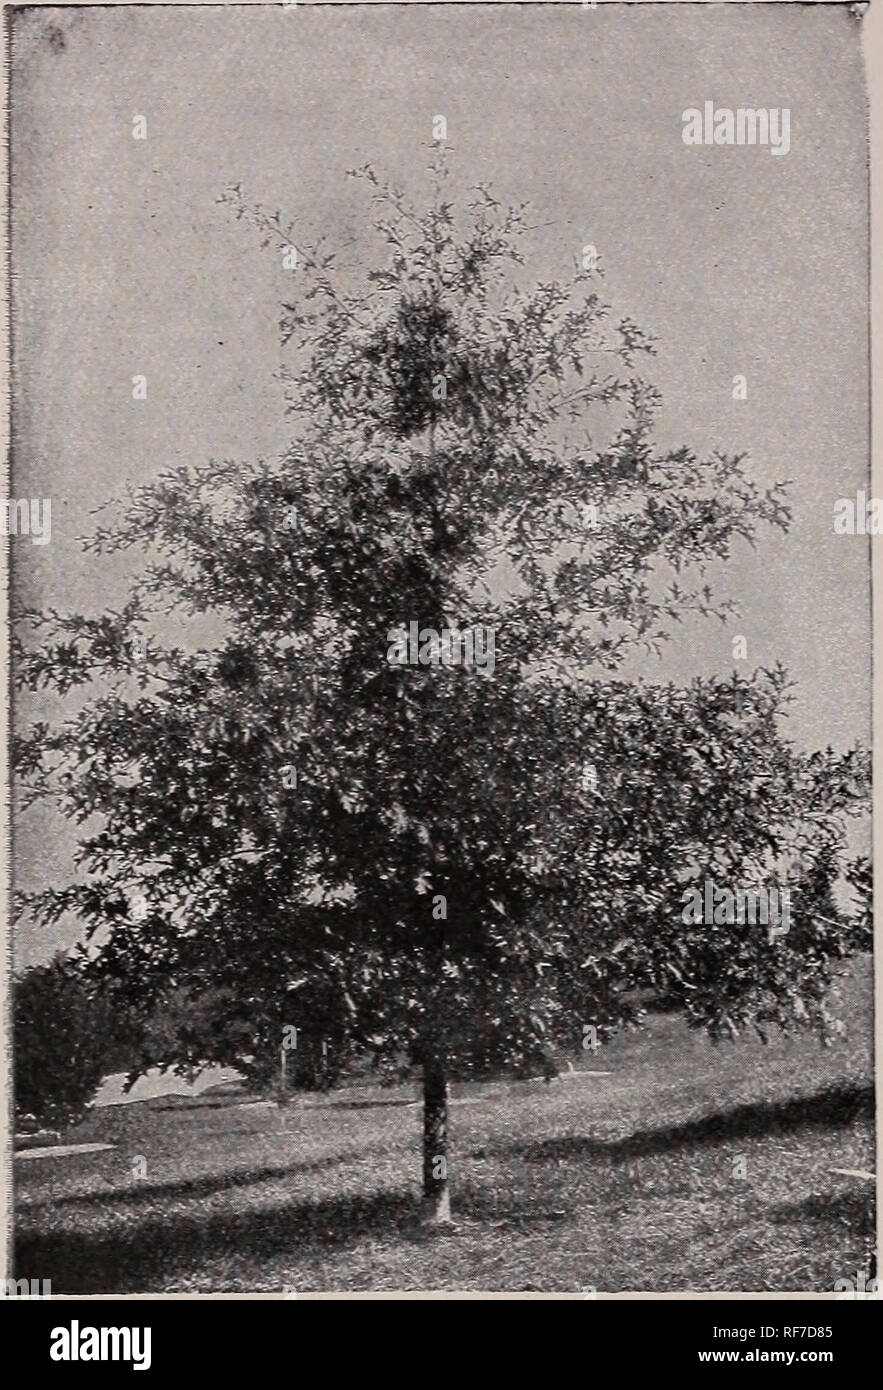 . Ornamental trees &amp; plants : no. 2. Nursery stock Pennsylvania West Chester Catalogs; Nurseries (Horticulture) Pennsylvania West Chester Catalogs; Plants, Ornamental Catalogs; Trees Seedlings Catalogs; Ornamental shrubs Catalogs; Bulbs (Plants) Catalogs. -20 Hoopes, Brother &amp; Thomas, West Chester, Pa.. Quercus palustris POPULUS grandidentata penduliformis Syn., P.Graca pendula). Weeping Poplar. A decidedly pendu- lous form, with long, slender branches, and bright green, dentate leaves. The growth is strong, the tree hardy and reliable. P. nigra Italica I Syn.. P. dilatata). Lombard} P Stock Photo